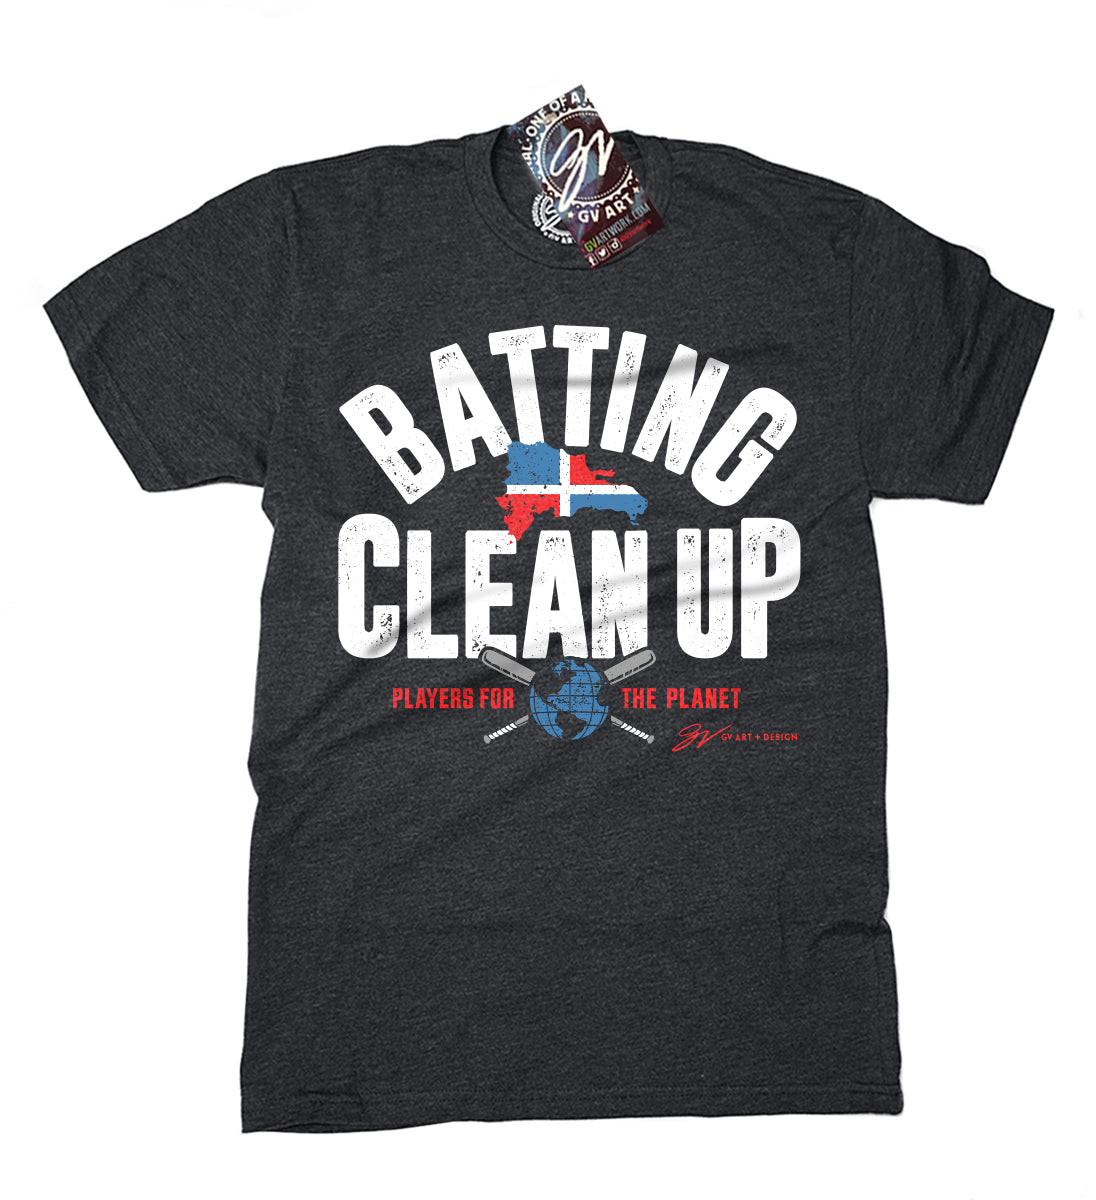 Batting Cleanup - Players For The Planet T shirt